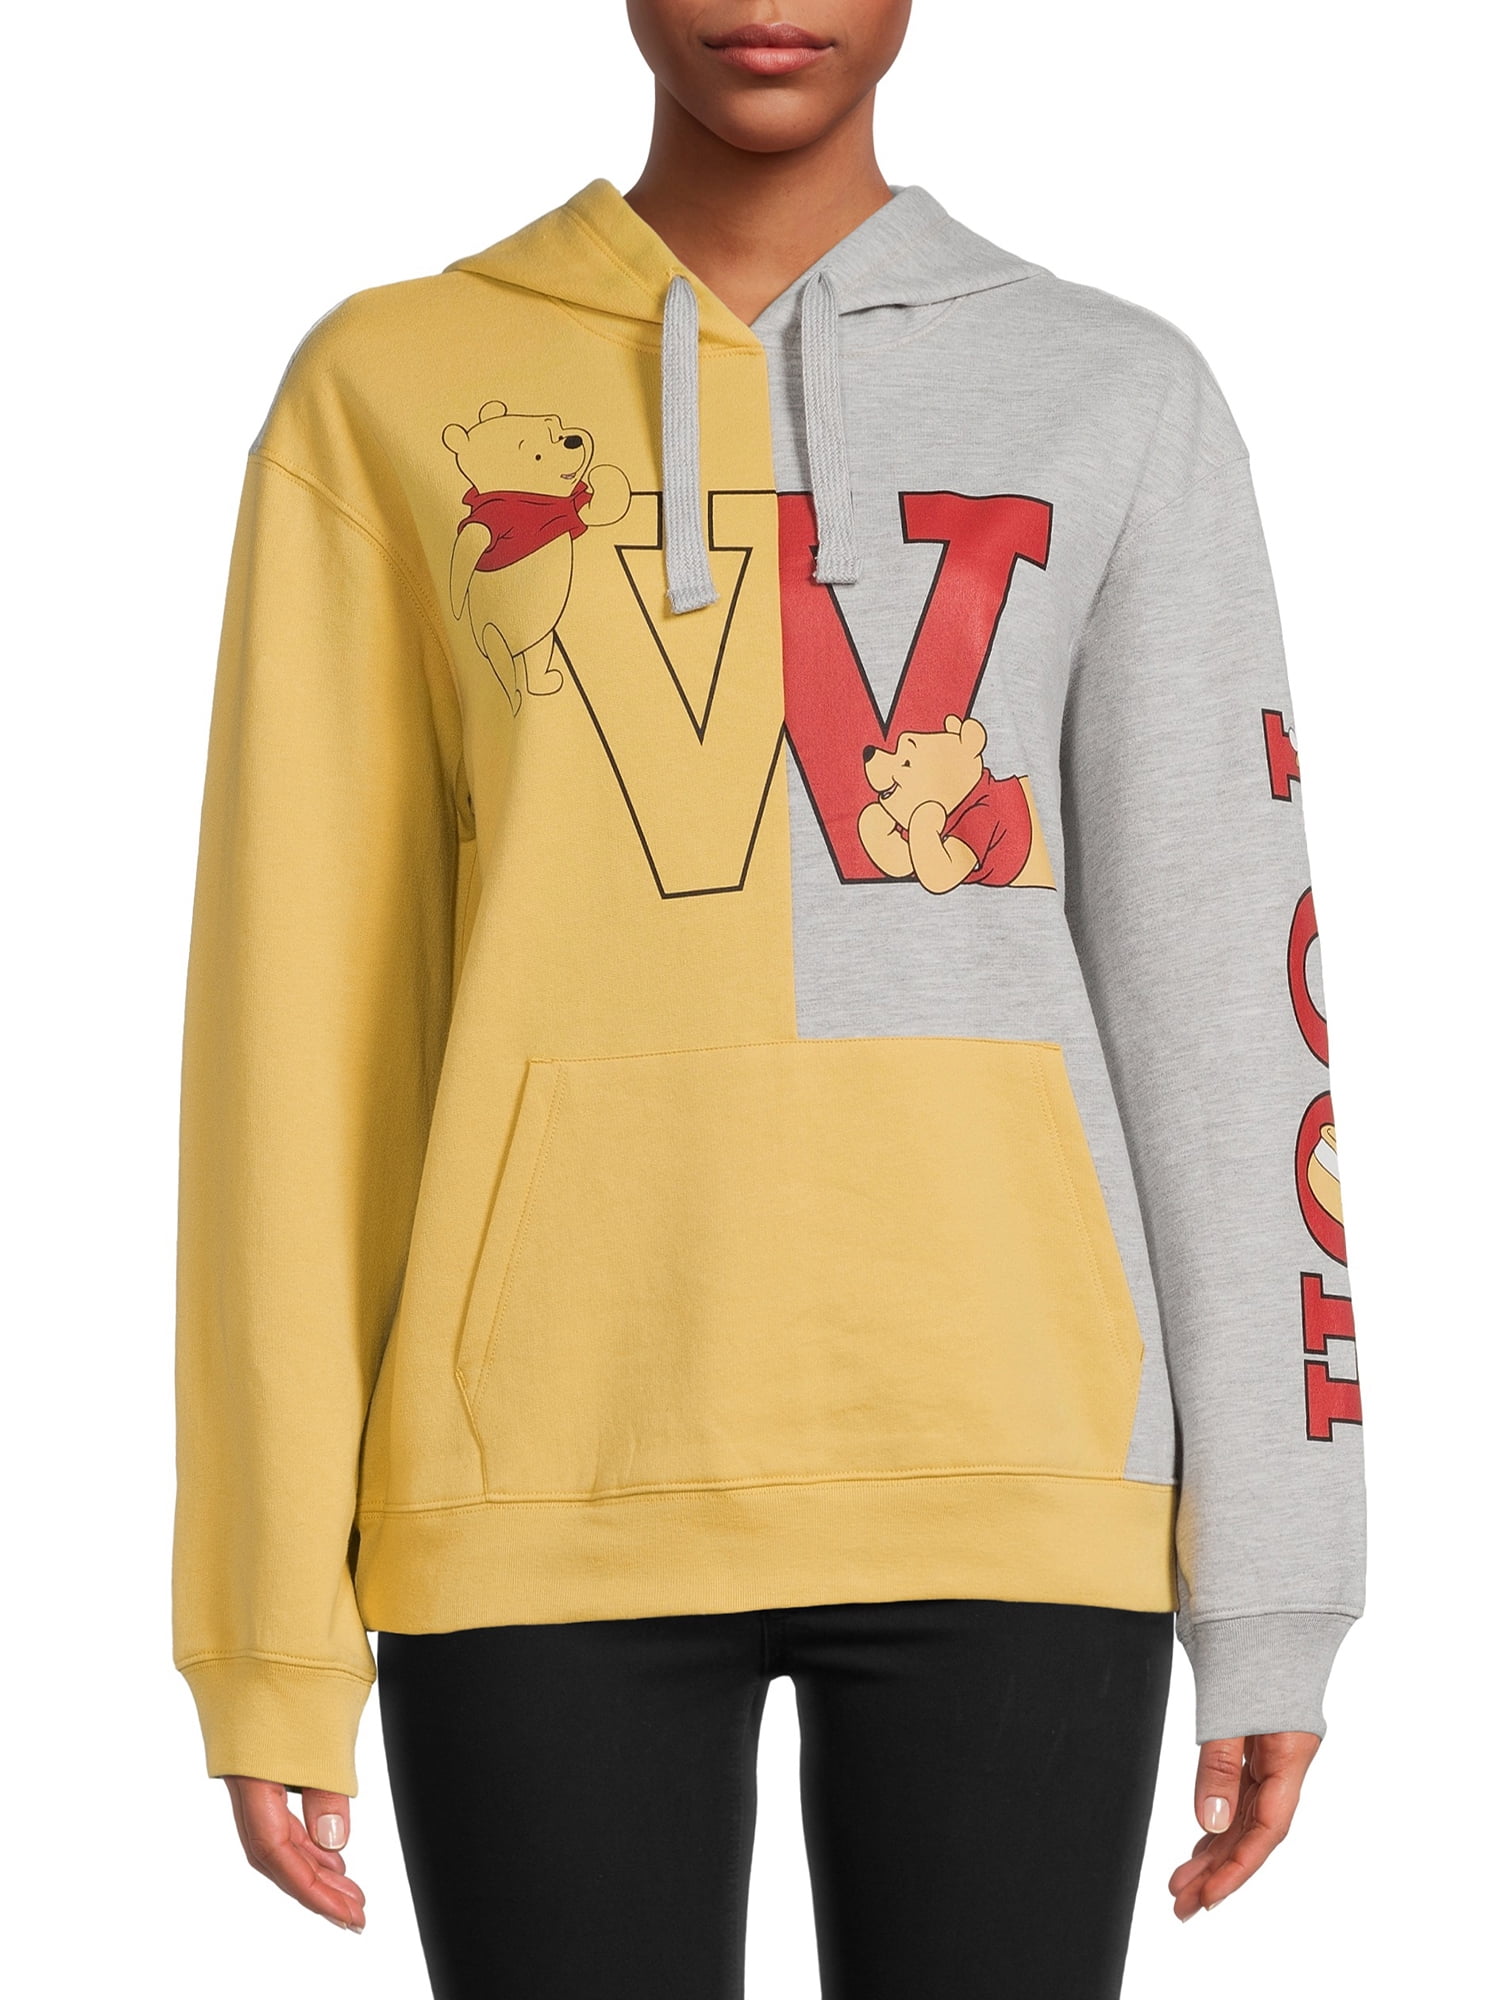 LICENSE Winnie the Pooh Colorblocked Graphic Pullover Hoodie